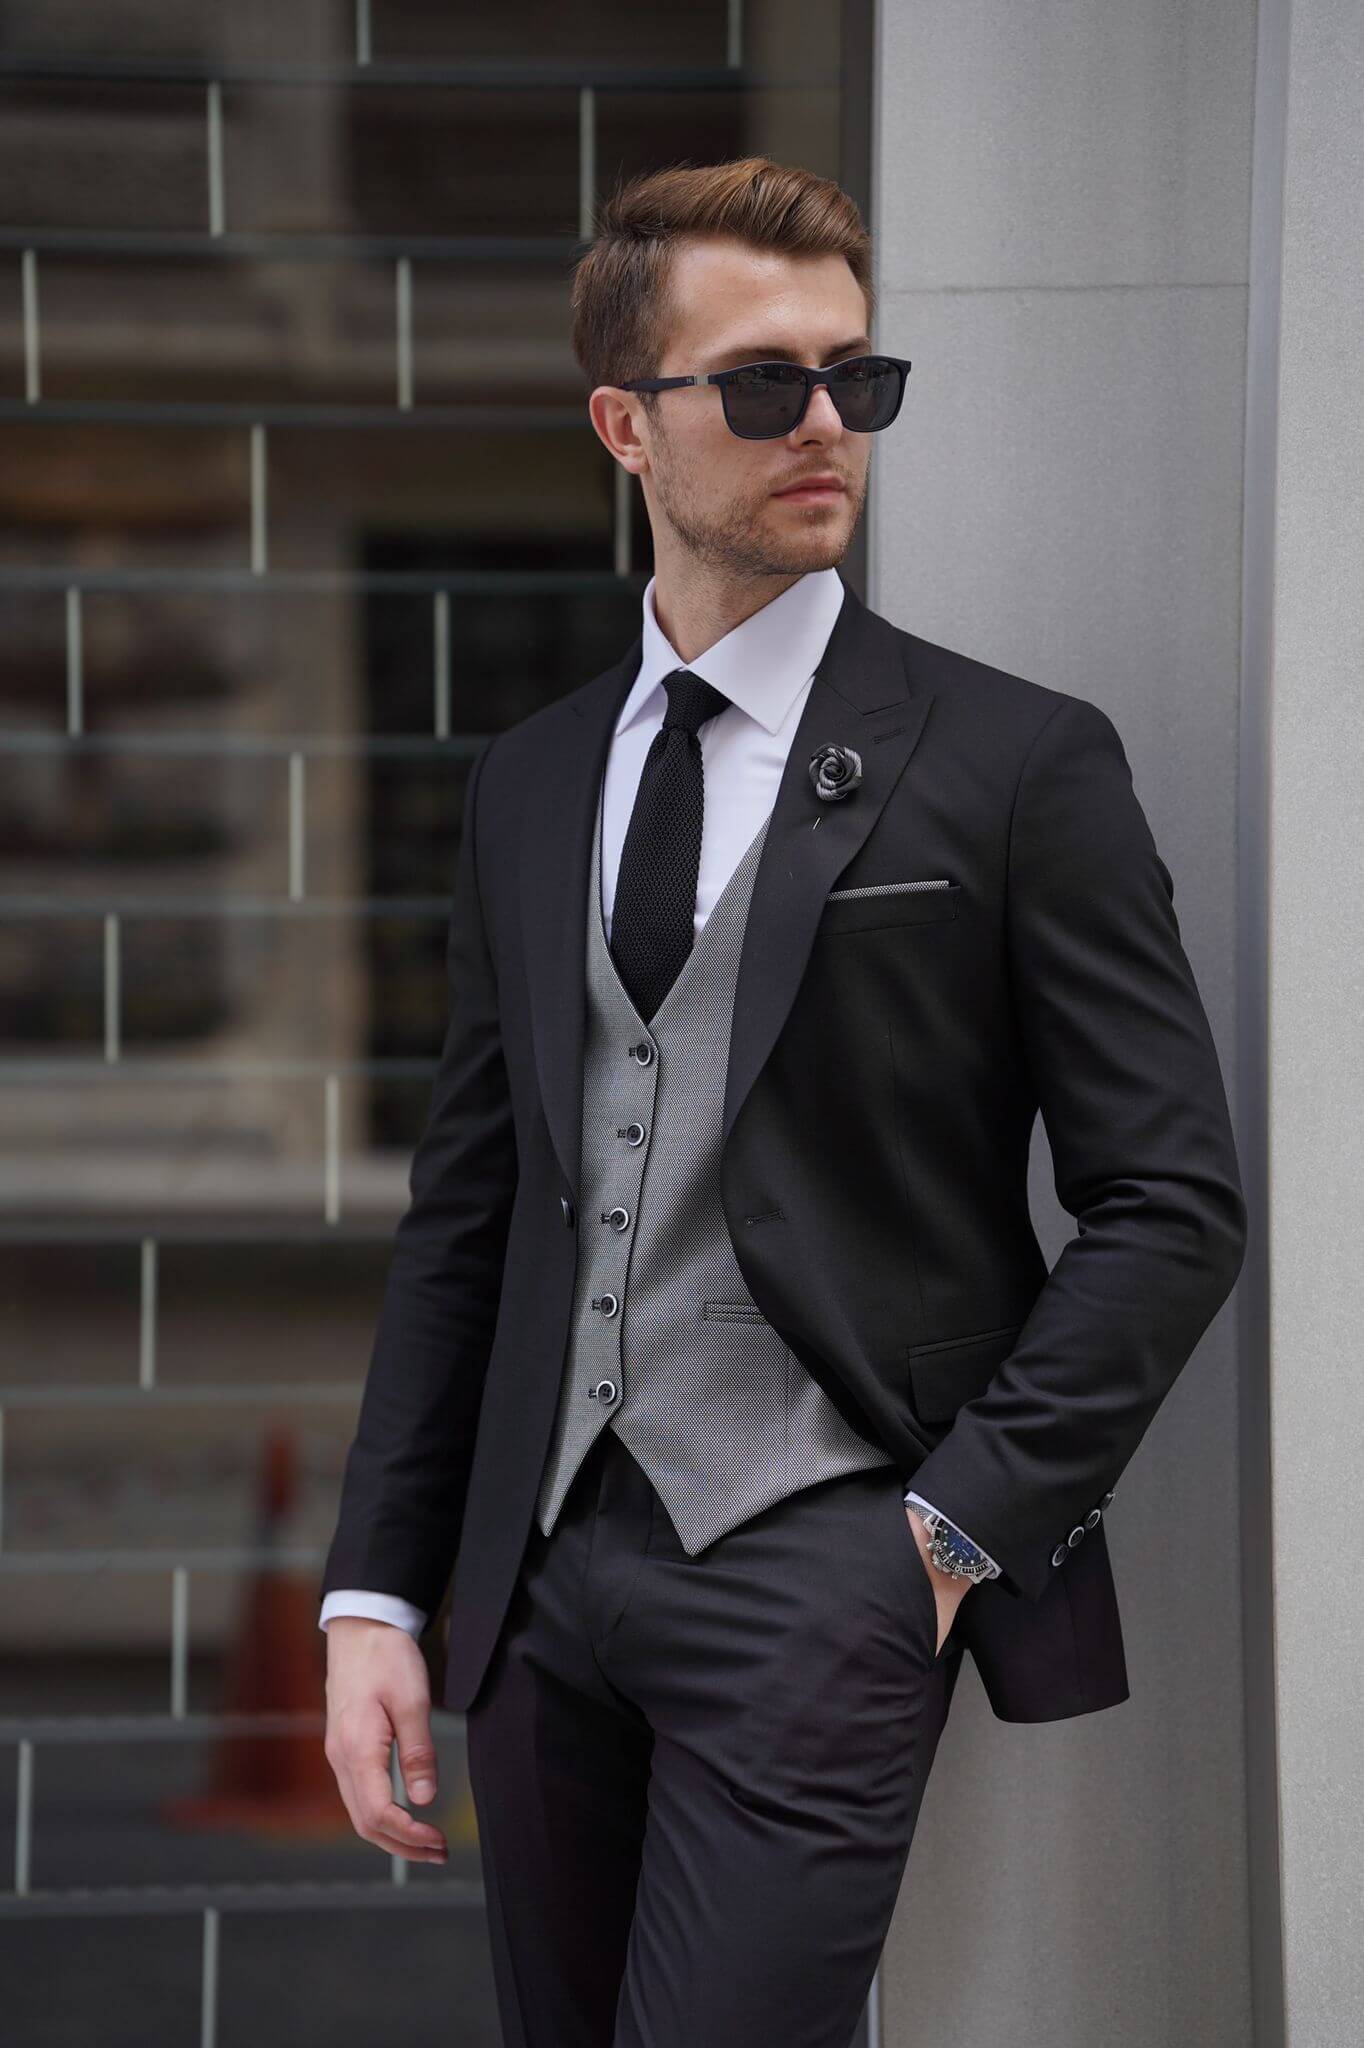 A Slim Fit Wool Black and Gray Suit on display.